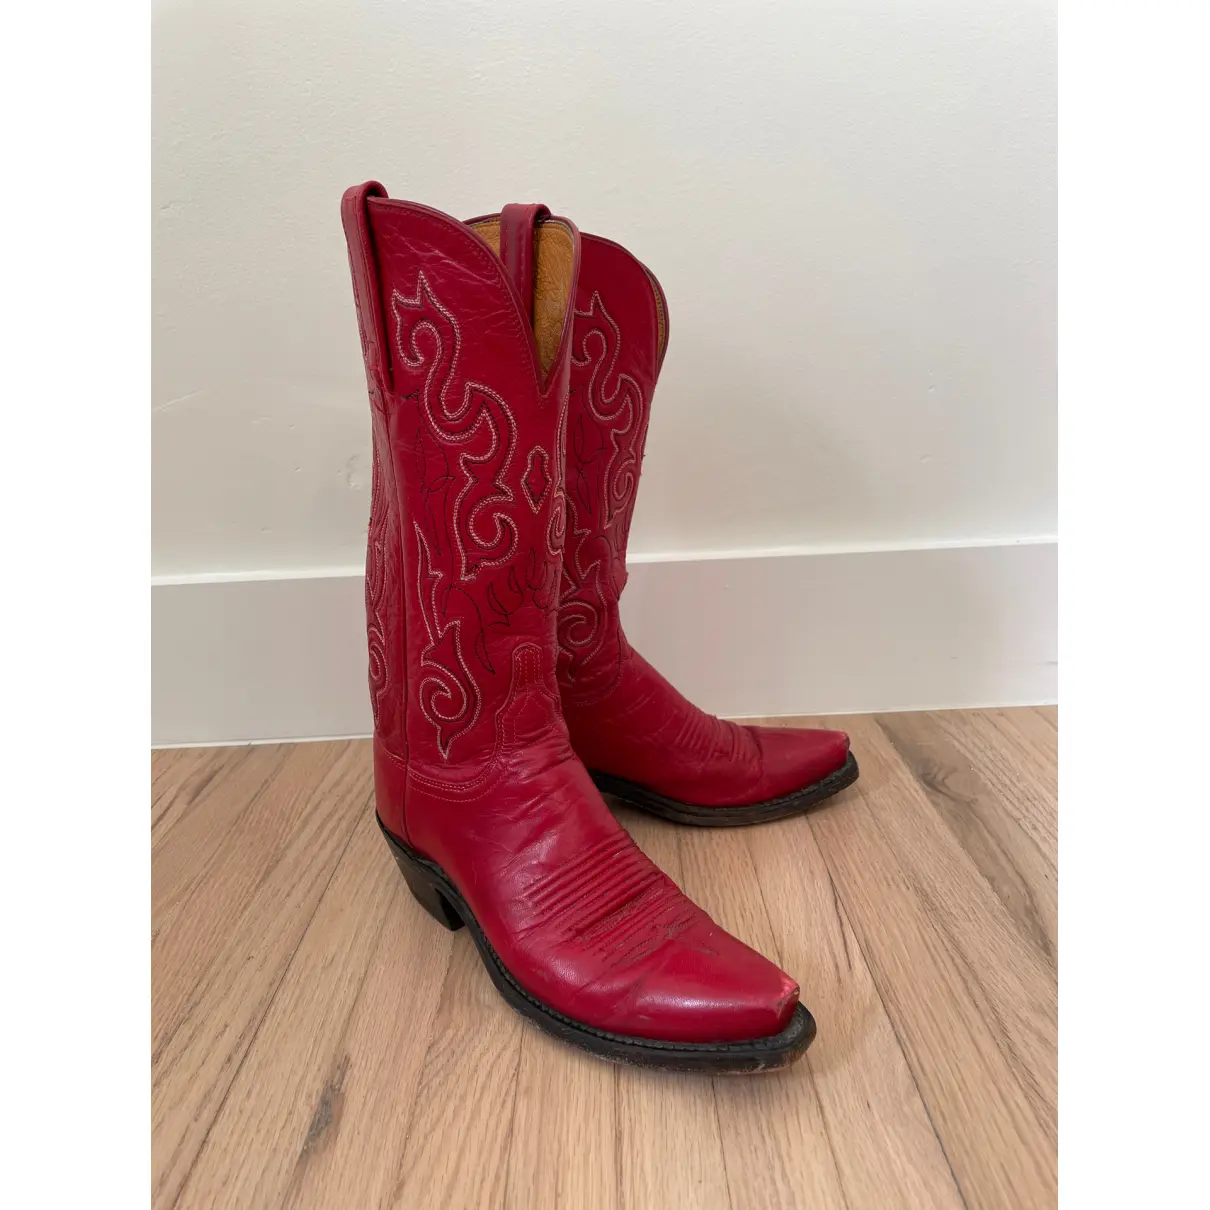 Buy Lucchese Leather cowboy boots online